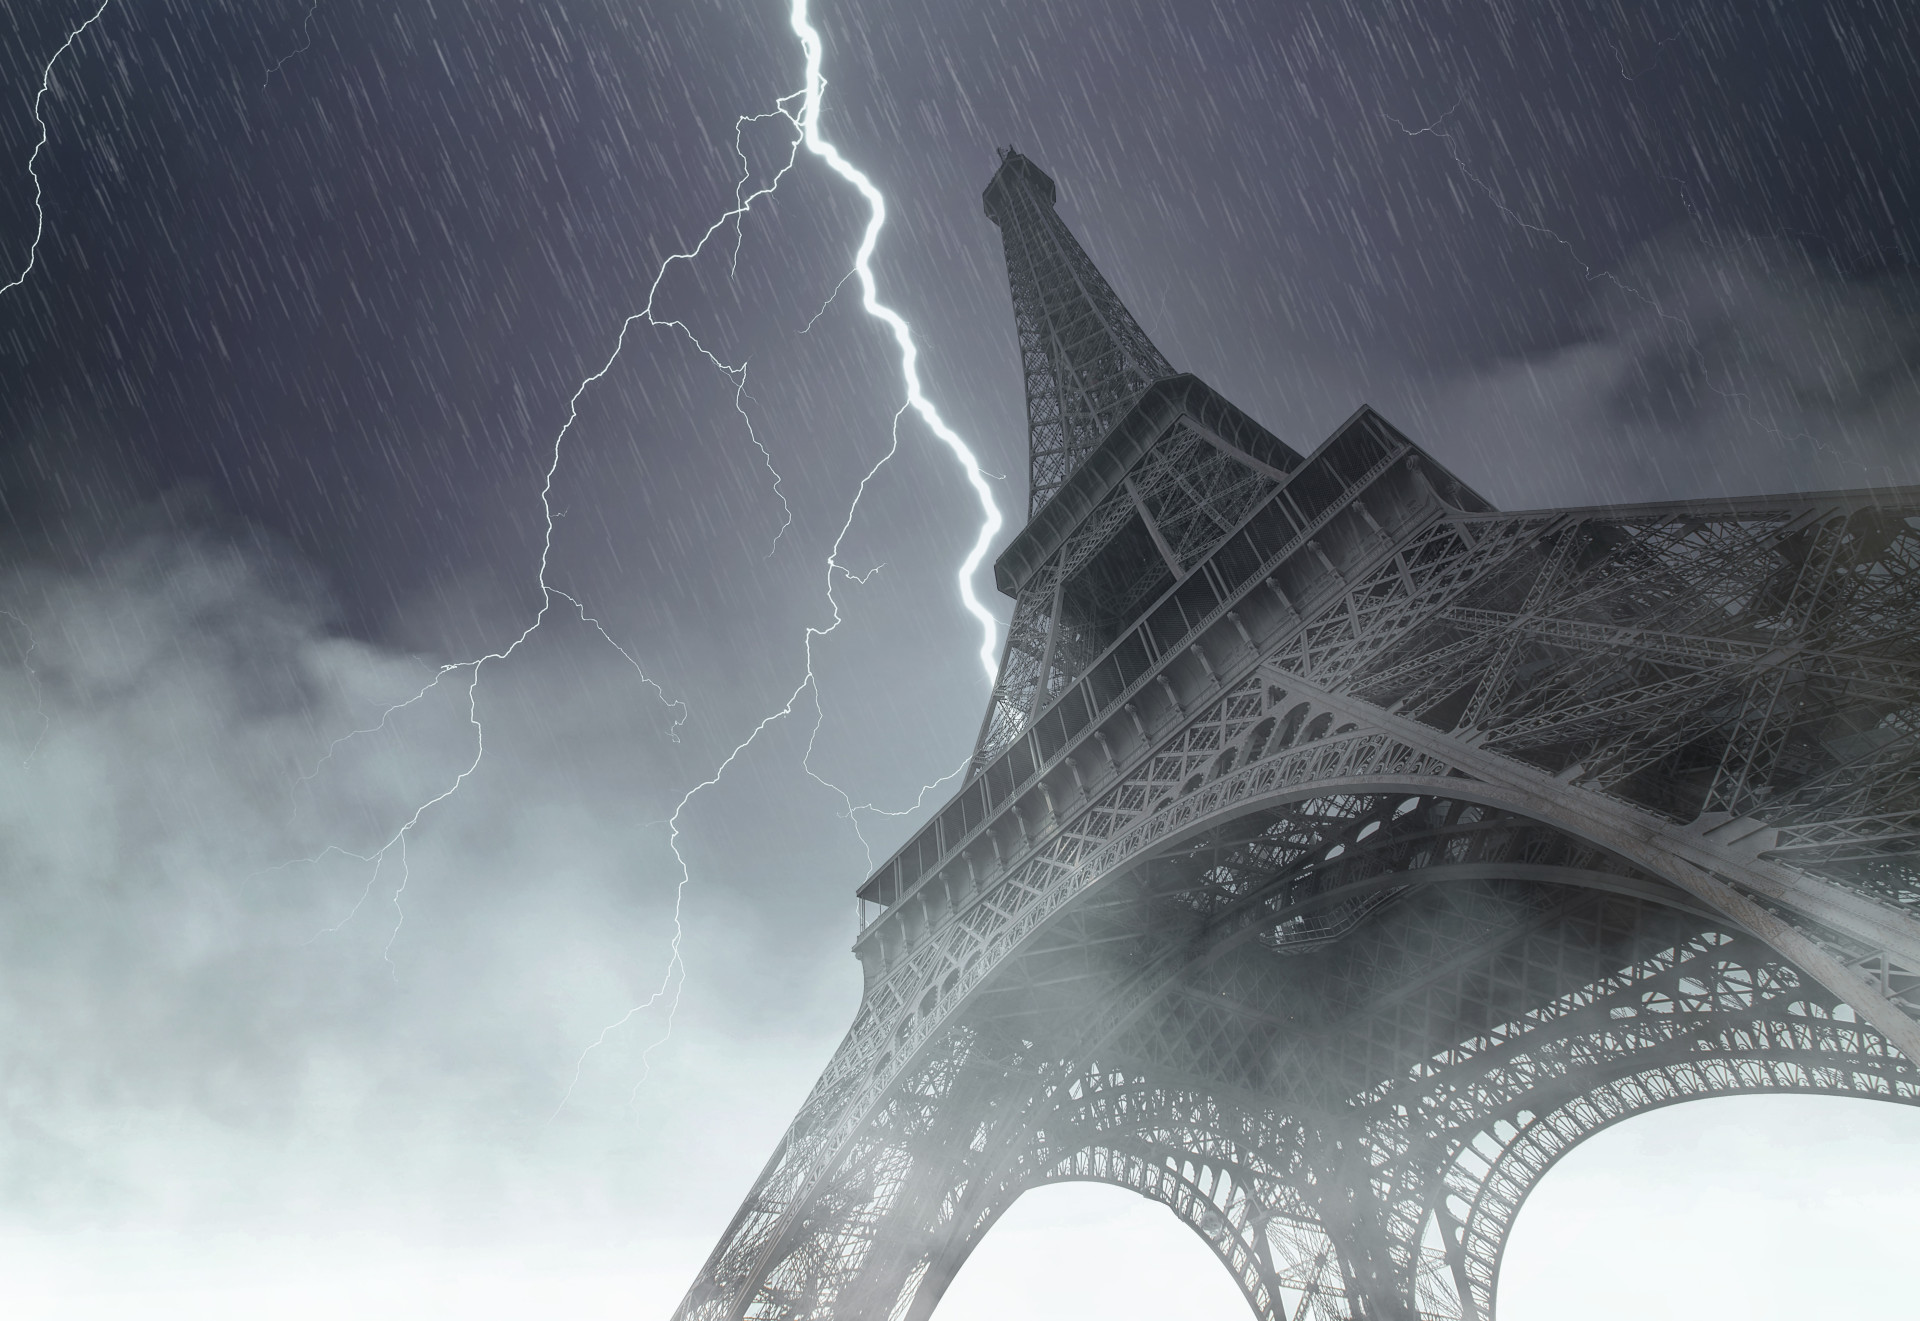 In June 1902, the Eiffel Tower was struck by lightning not once but three times, causing a lot of damage.<p><a href="https://www.msn.com/en-us/community/channel/vid-7xx8mnucu55yw63we9va2gwr7uihbxwc68fxqp25x6tg4ftibpra?cvid=94631541bc0f4f89bfd59158d696ad7e">Follow us and access great exclusive content every day</a></p>